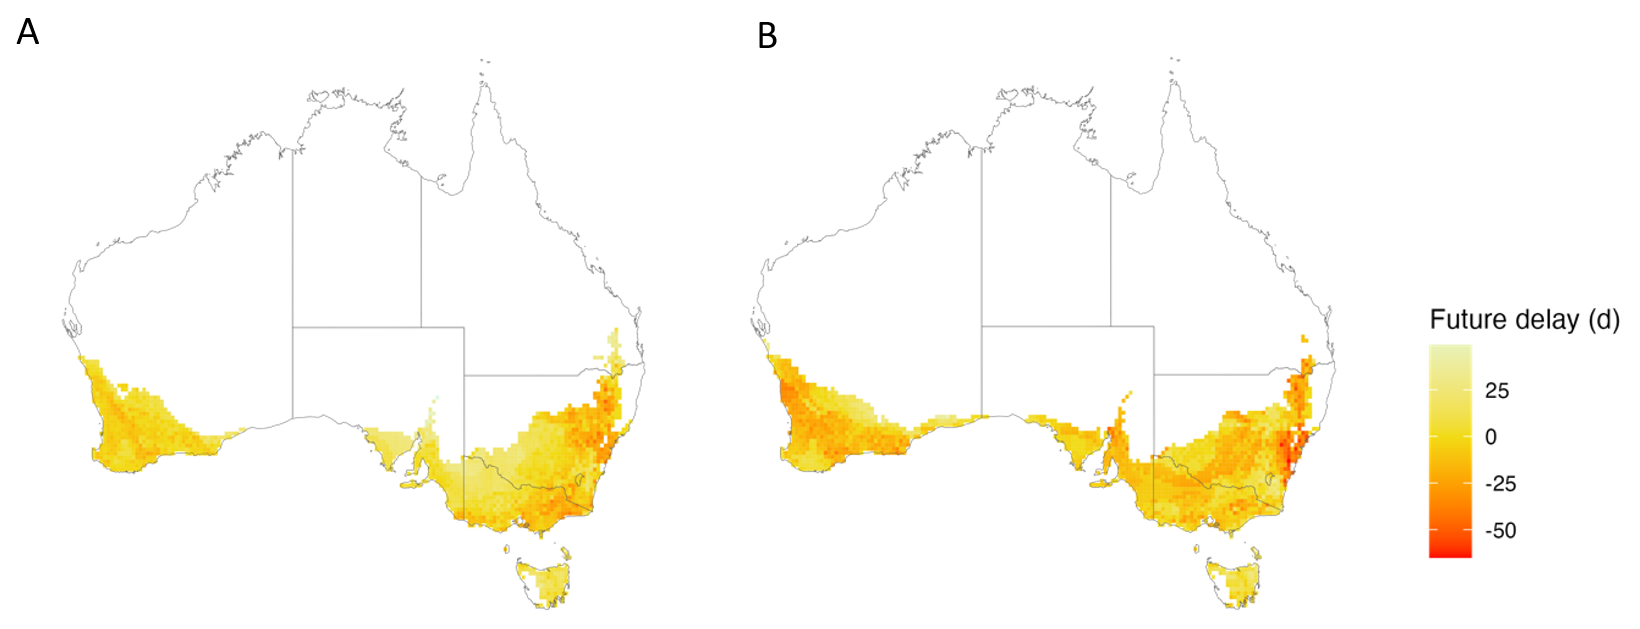 Geographical maps showing predicted shifts in the point of 90% diapause by 2050 under the SSP245 warming scenario (A) and the more extreme SSP585 scenario (B).